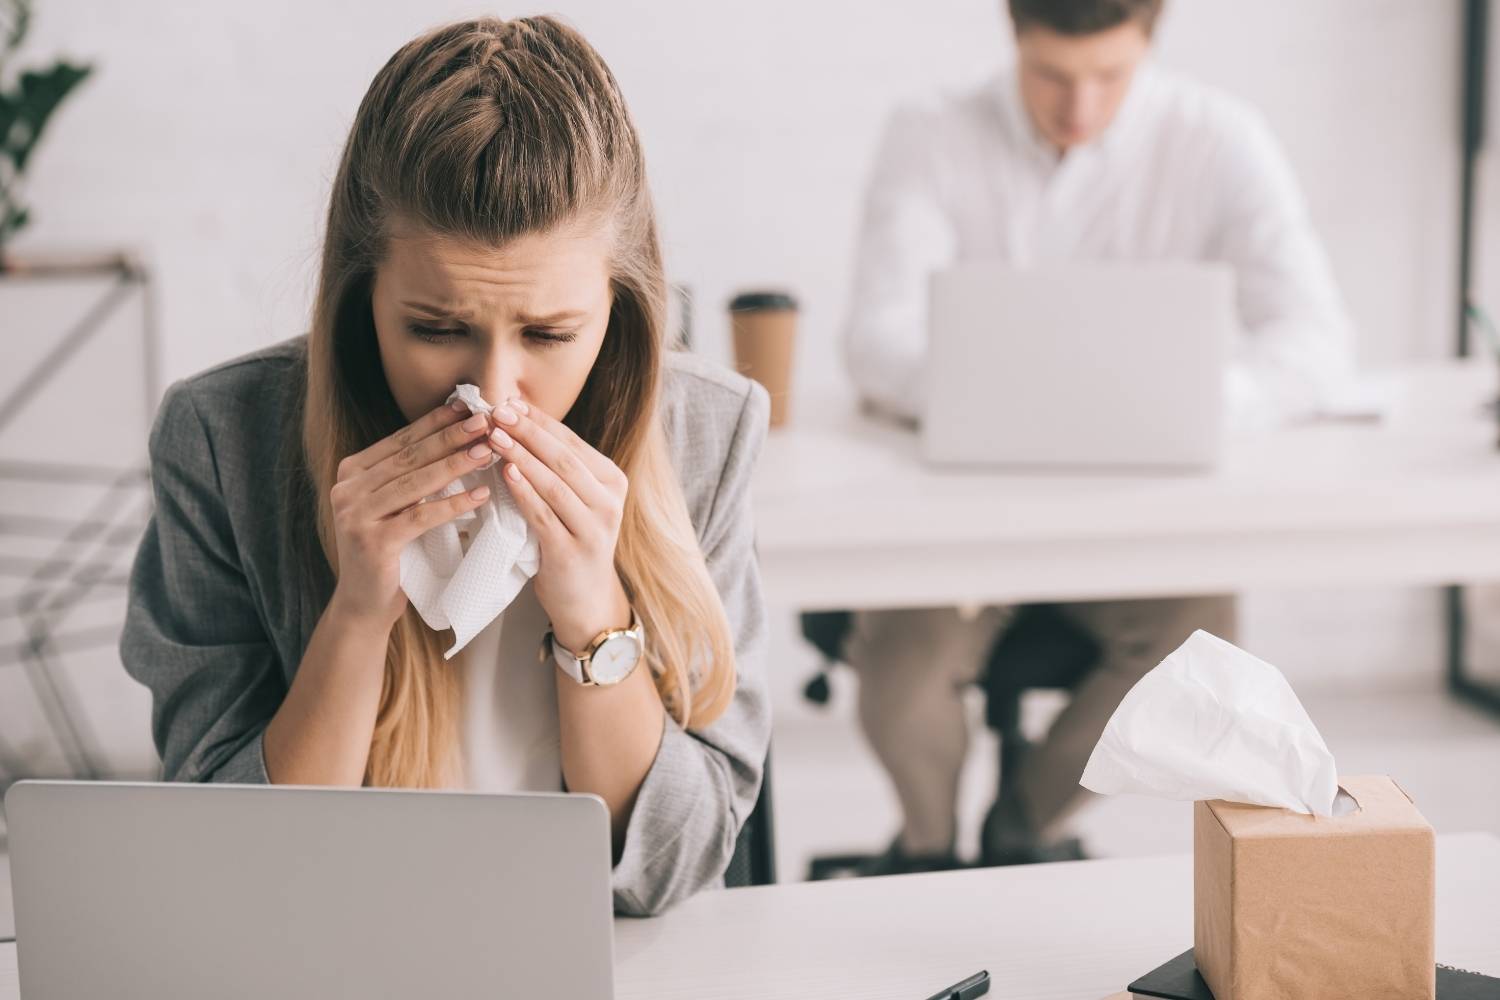 Preventing Germ Spread in the Workplace